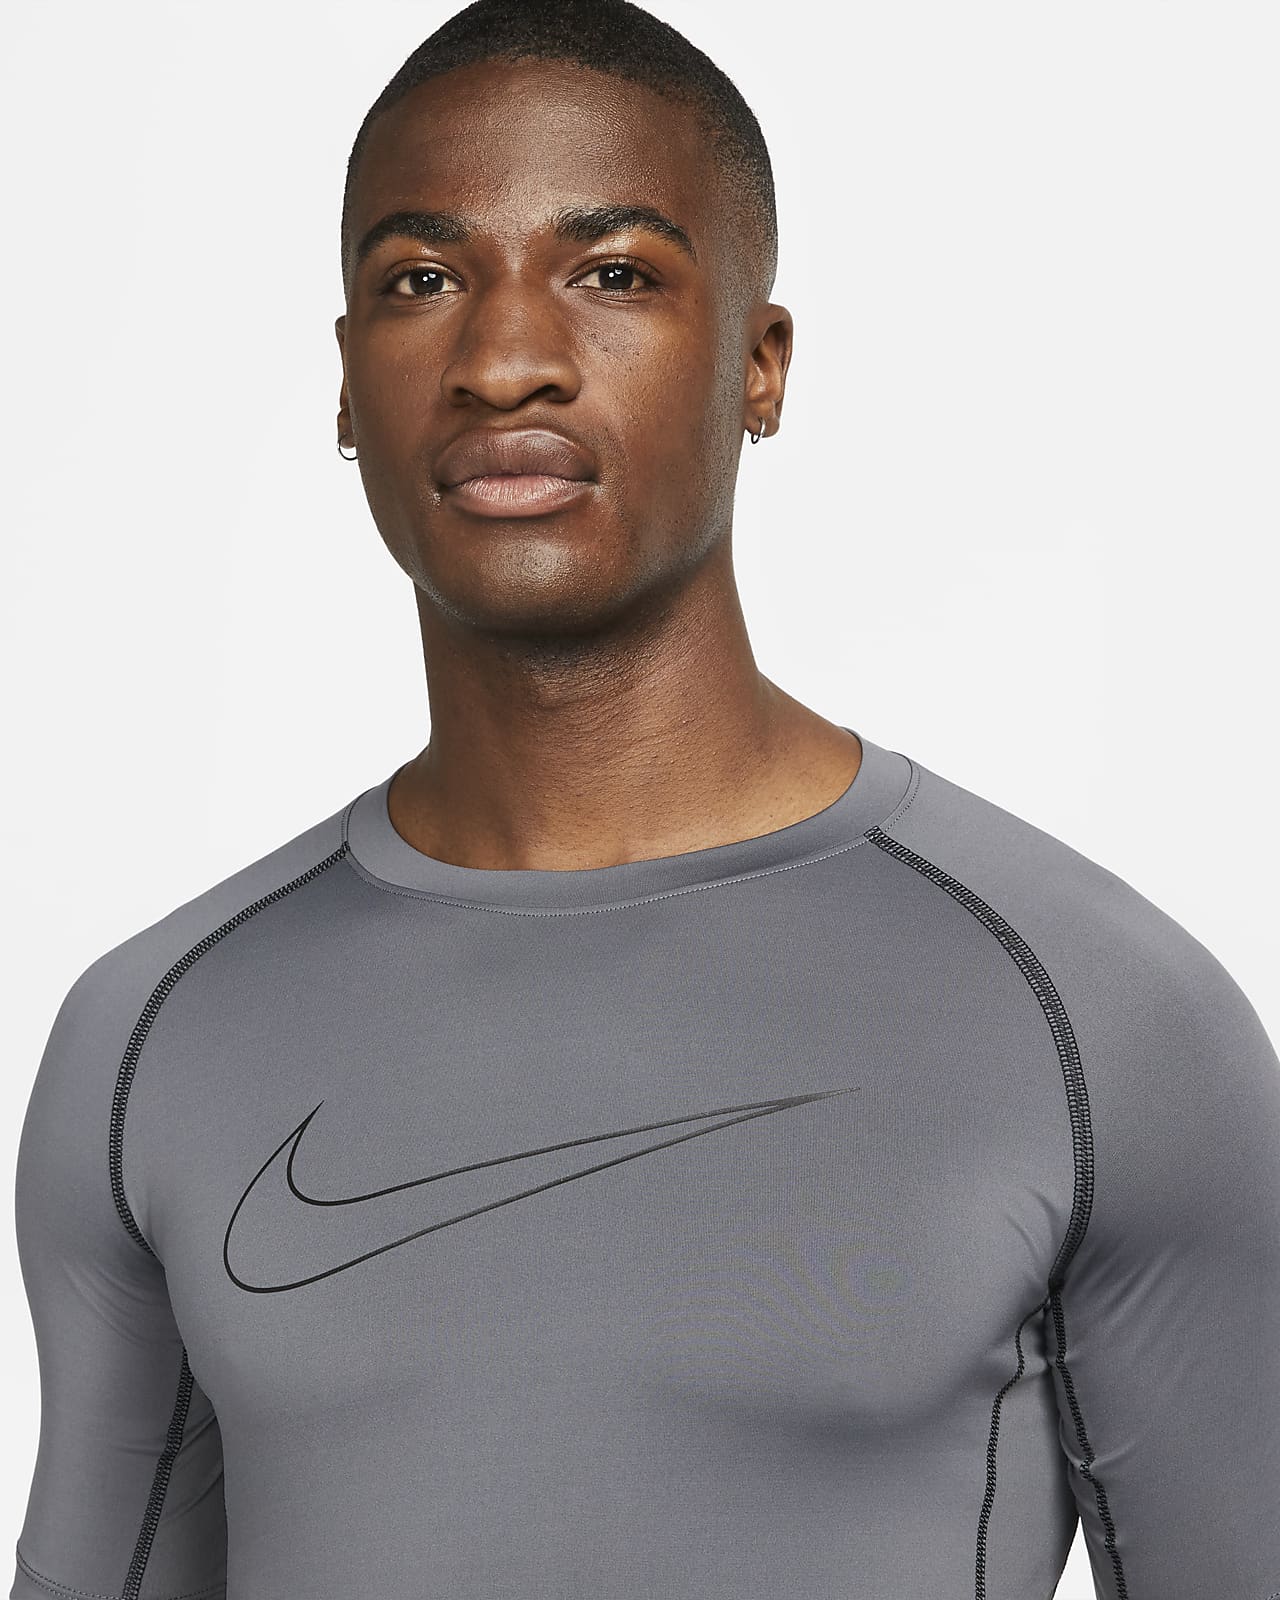 in terms of Between Federal Nike Pro Dri-FIT Men's Tight Fit Short-Sleeve Top. Nike.com